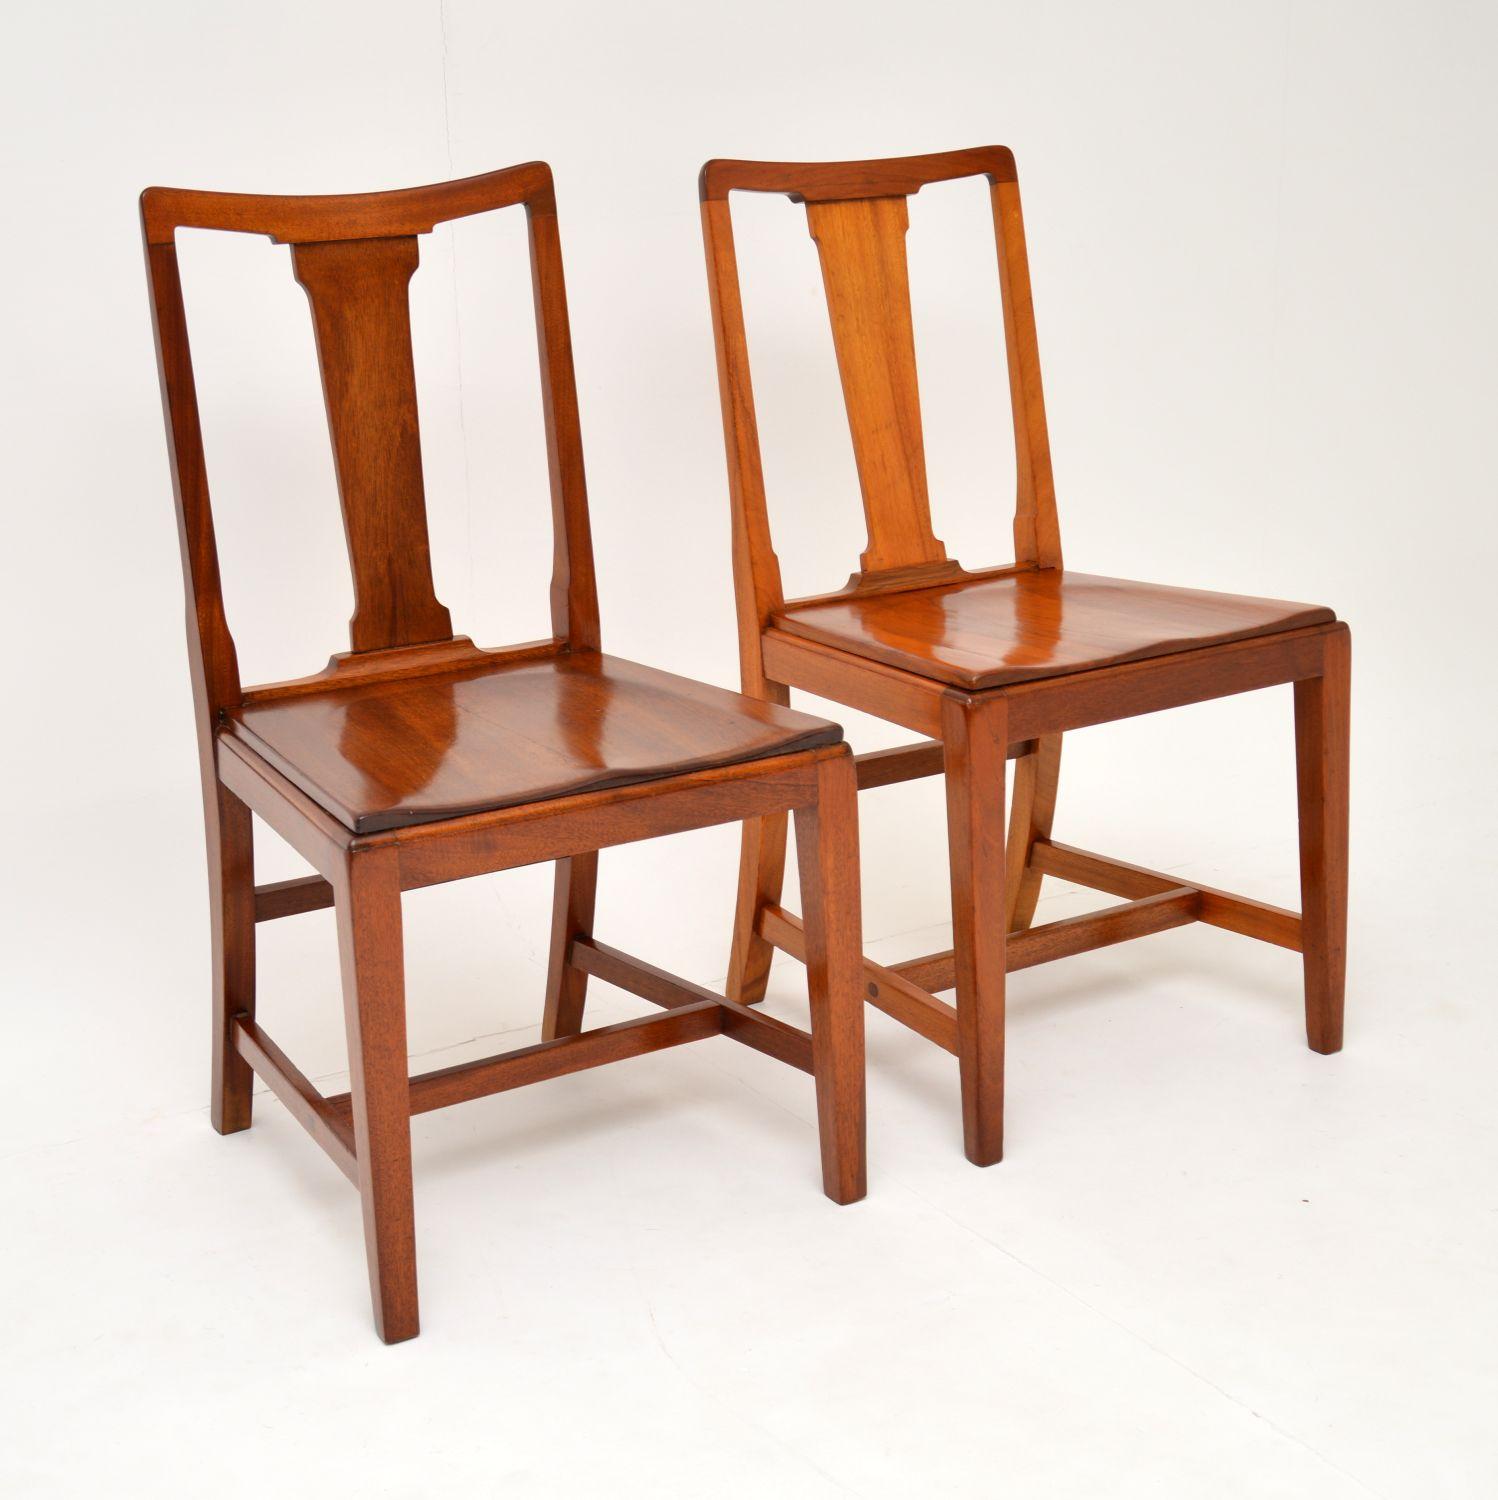 A handsome and unusual pair of Art Deco period side chairs, these are of amazing quality and are solid mahogany throughout.

They are stamped beneath the seat: 1937 H(F)Ltd and have the royal stamp of approval from the king at the time Edward